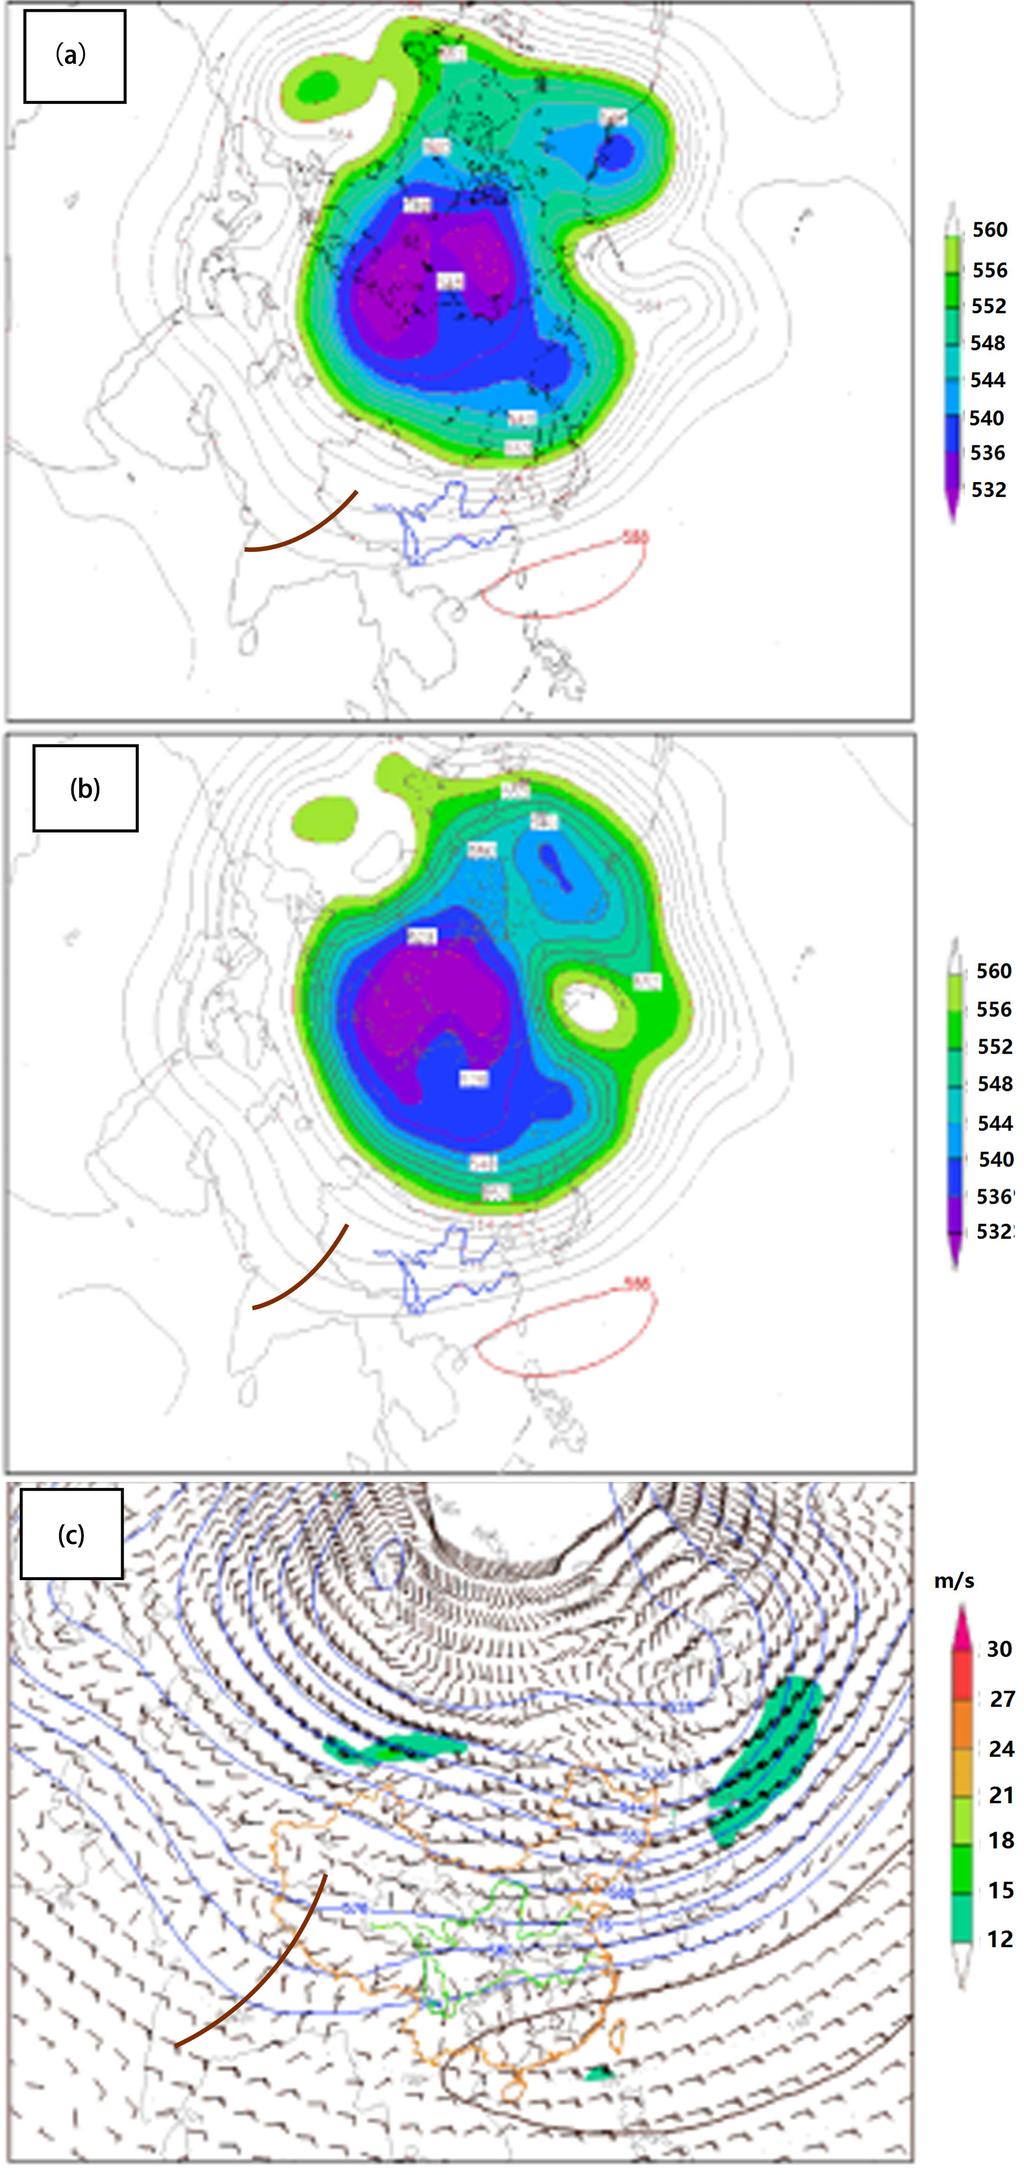 tion (Figure 3(c)), it can be seen that the polar vortex is located more northerly, the westerly frontal zone is located near the Okhotsk Sea, and the meridian and location of the India-Burma trough